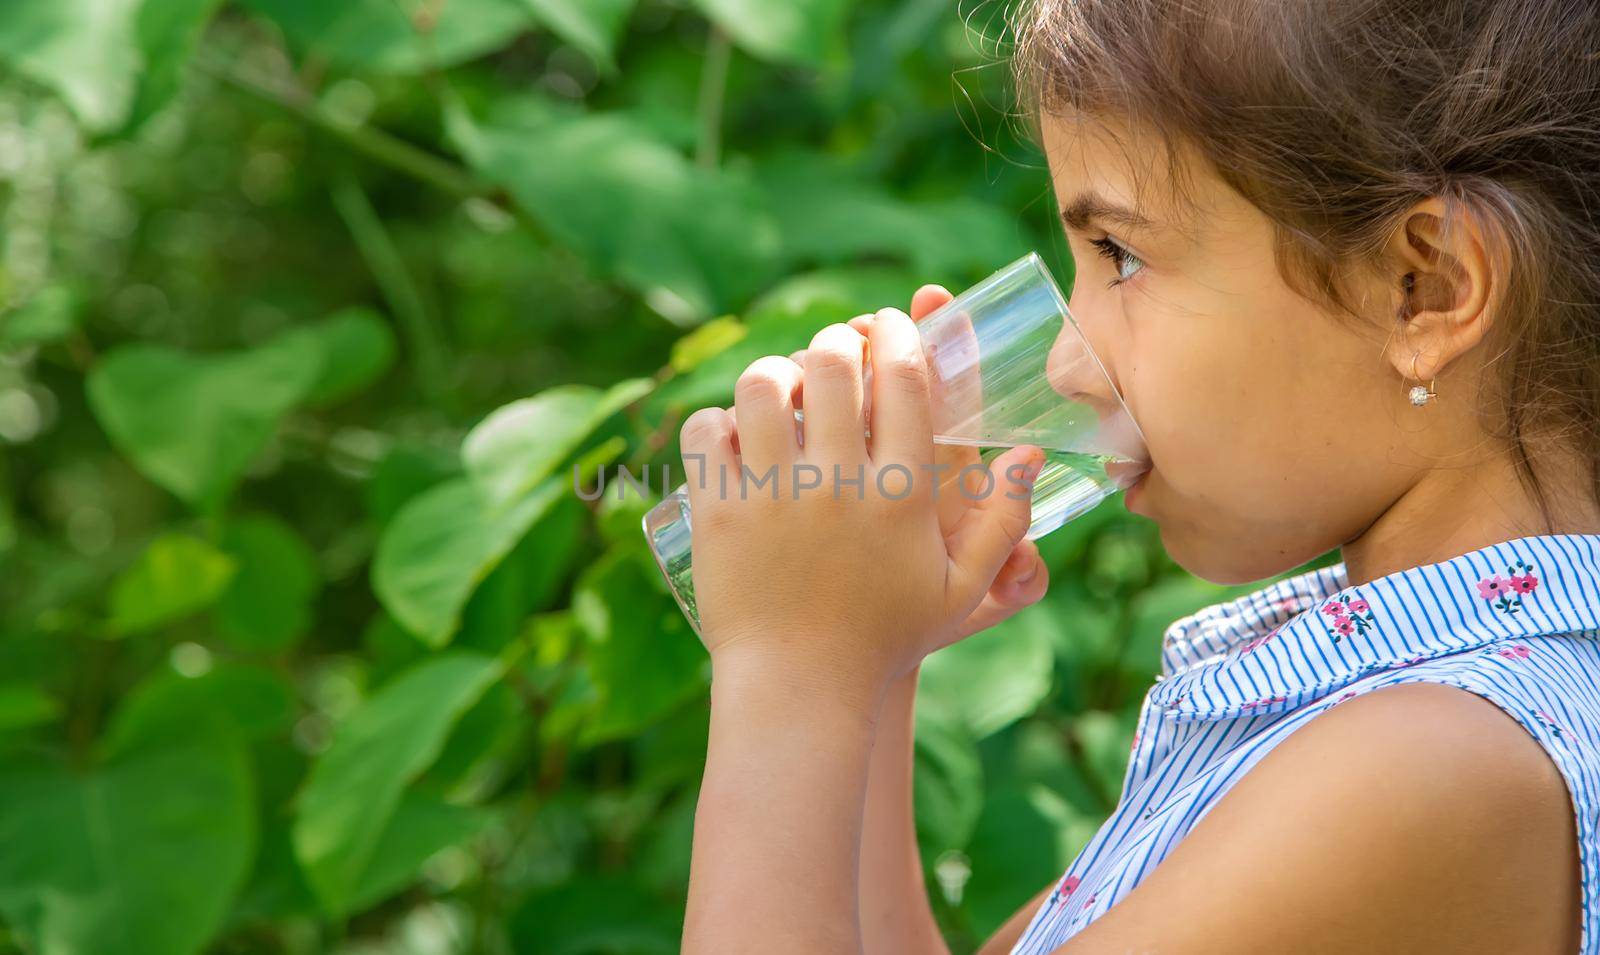 Child girl drinks water from a glass. Selective focus. Kid.